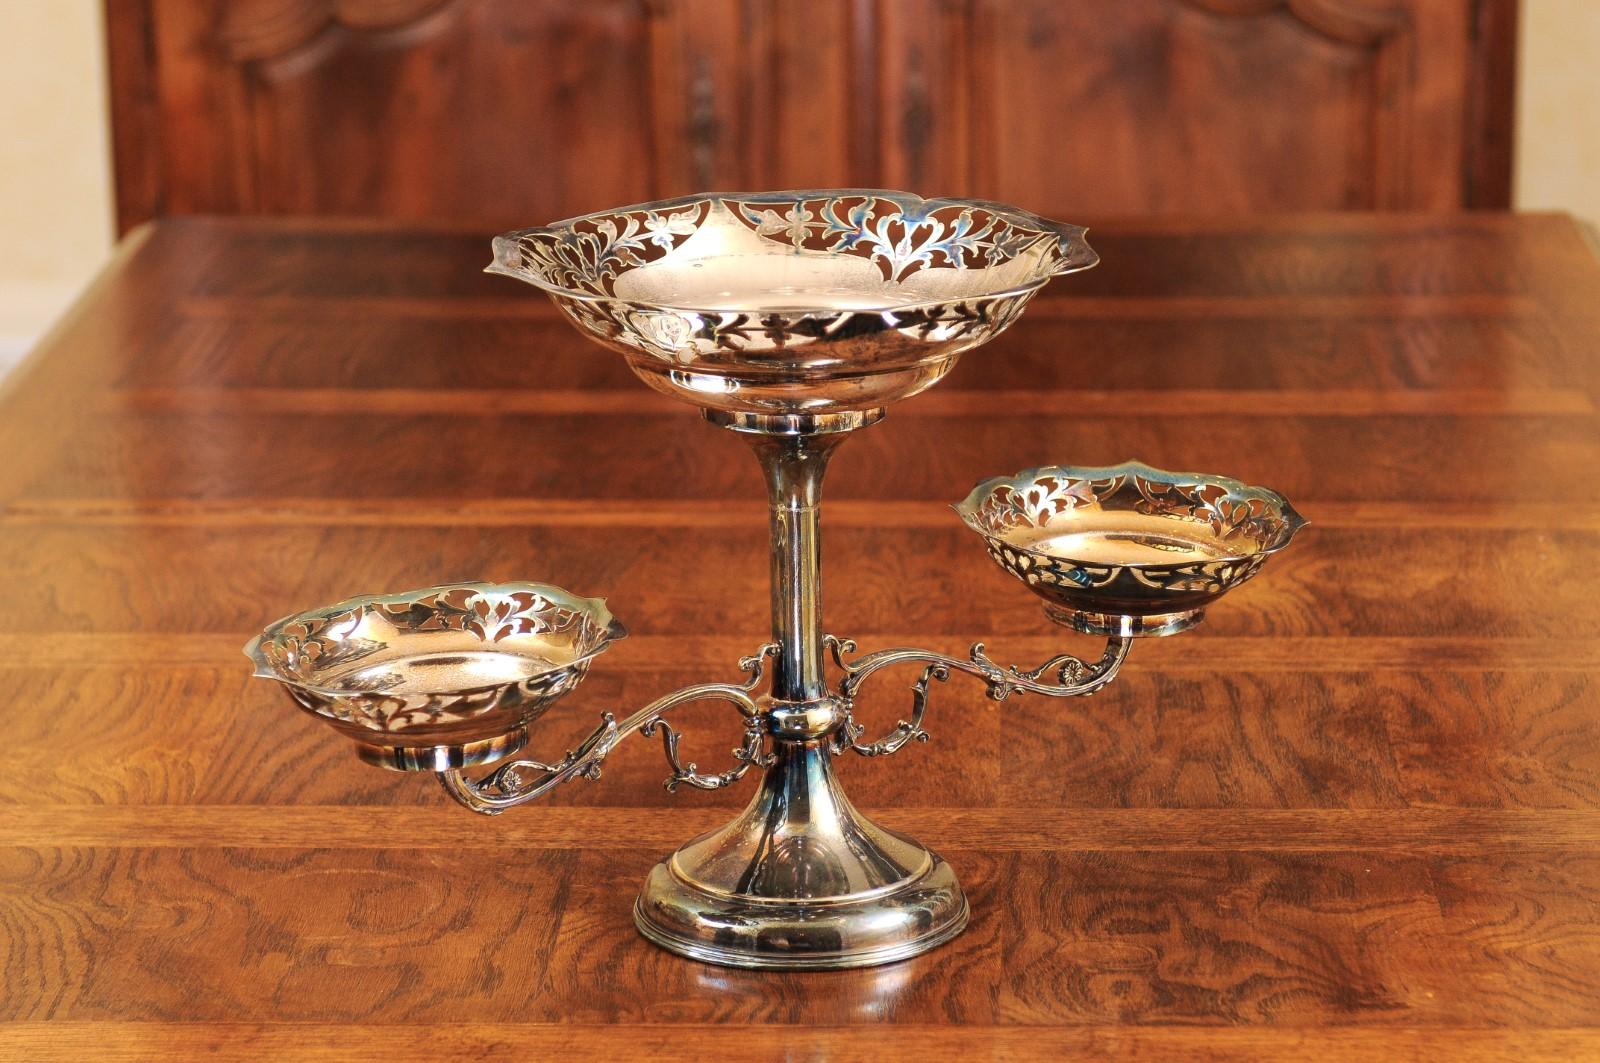 French 19th Century Silver Epergne with Pierced Foliage and Scrolling Motifs For Sale 2